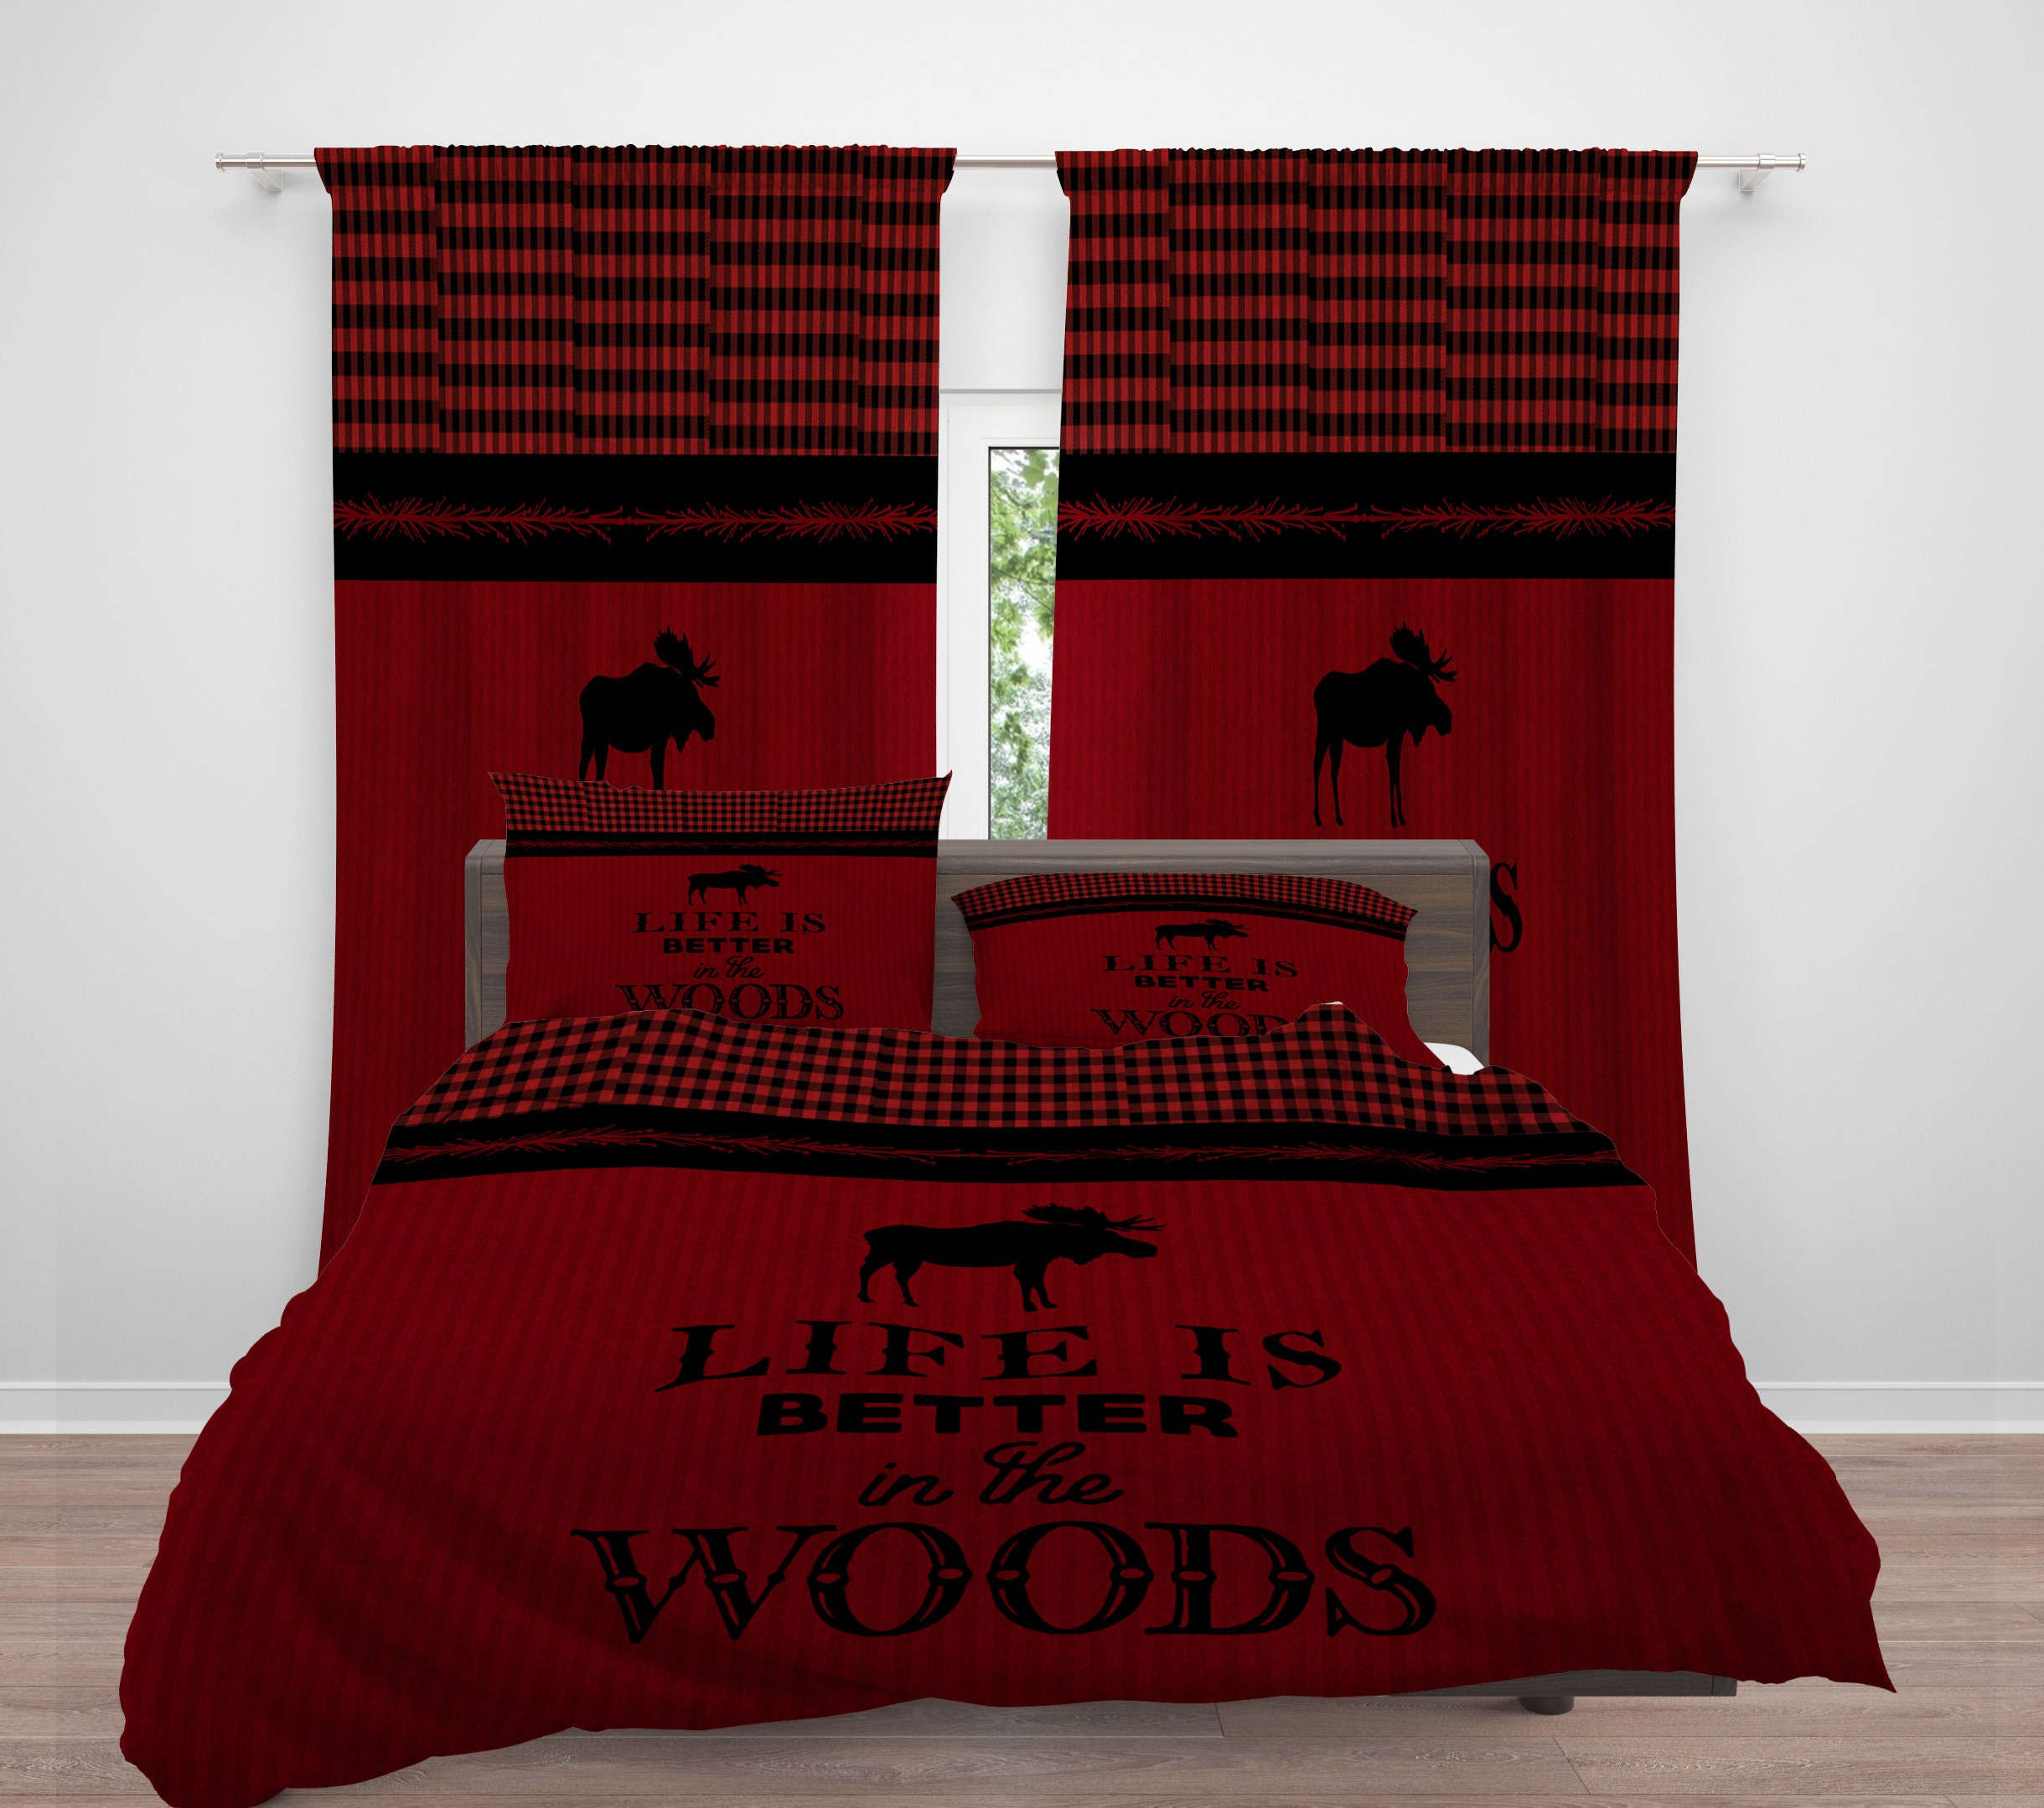 Rustic Moose Bedding Red Comforter Or Duvet Cover Twin Etsy